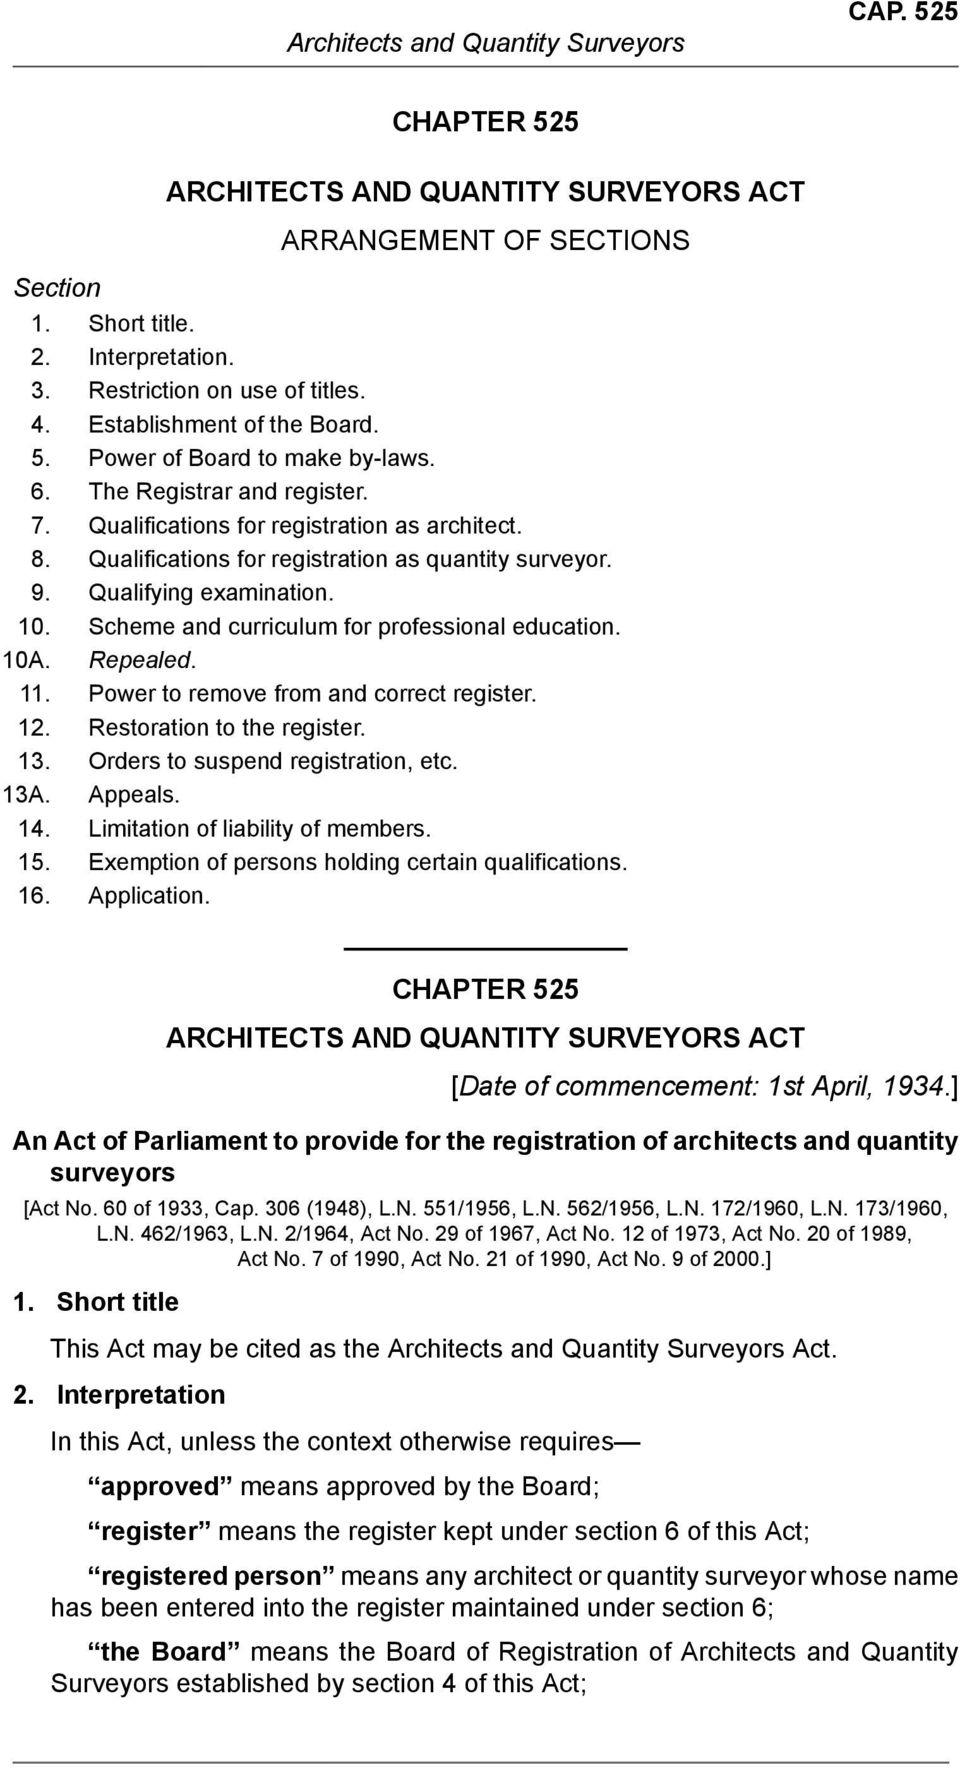 Scheme and curriculum for professional education. 10A. Repealed. 11. Power to remove from and correct register. 12. Restoration to the register. 13. Orders to suspend registration, etc. 13A. Appeals.